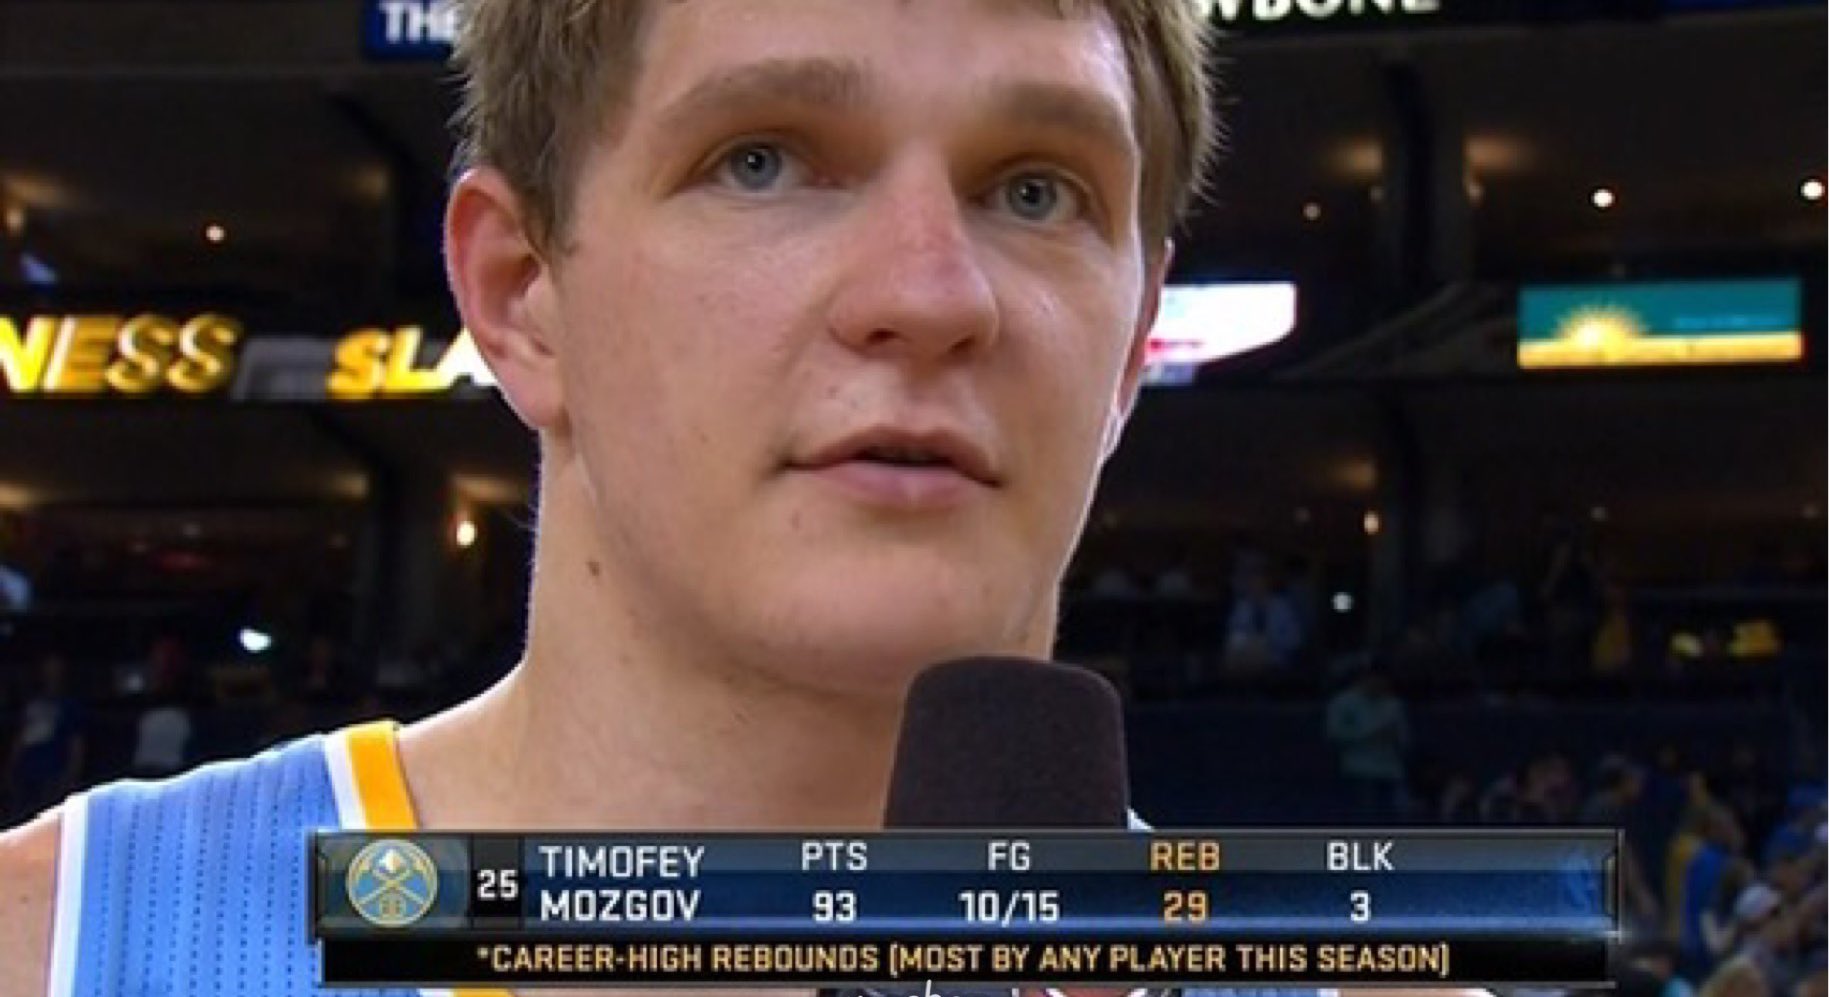 Happy birthday Timofey Mozgov!

Throwback to his career night and an epic typo. X 